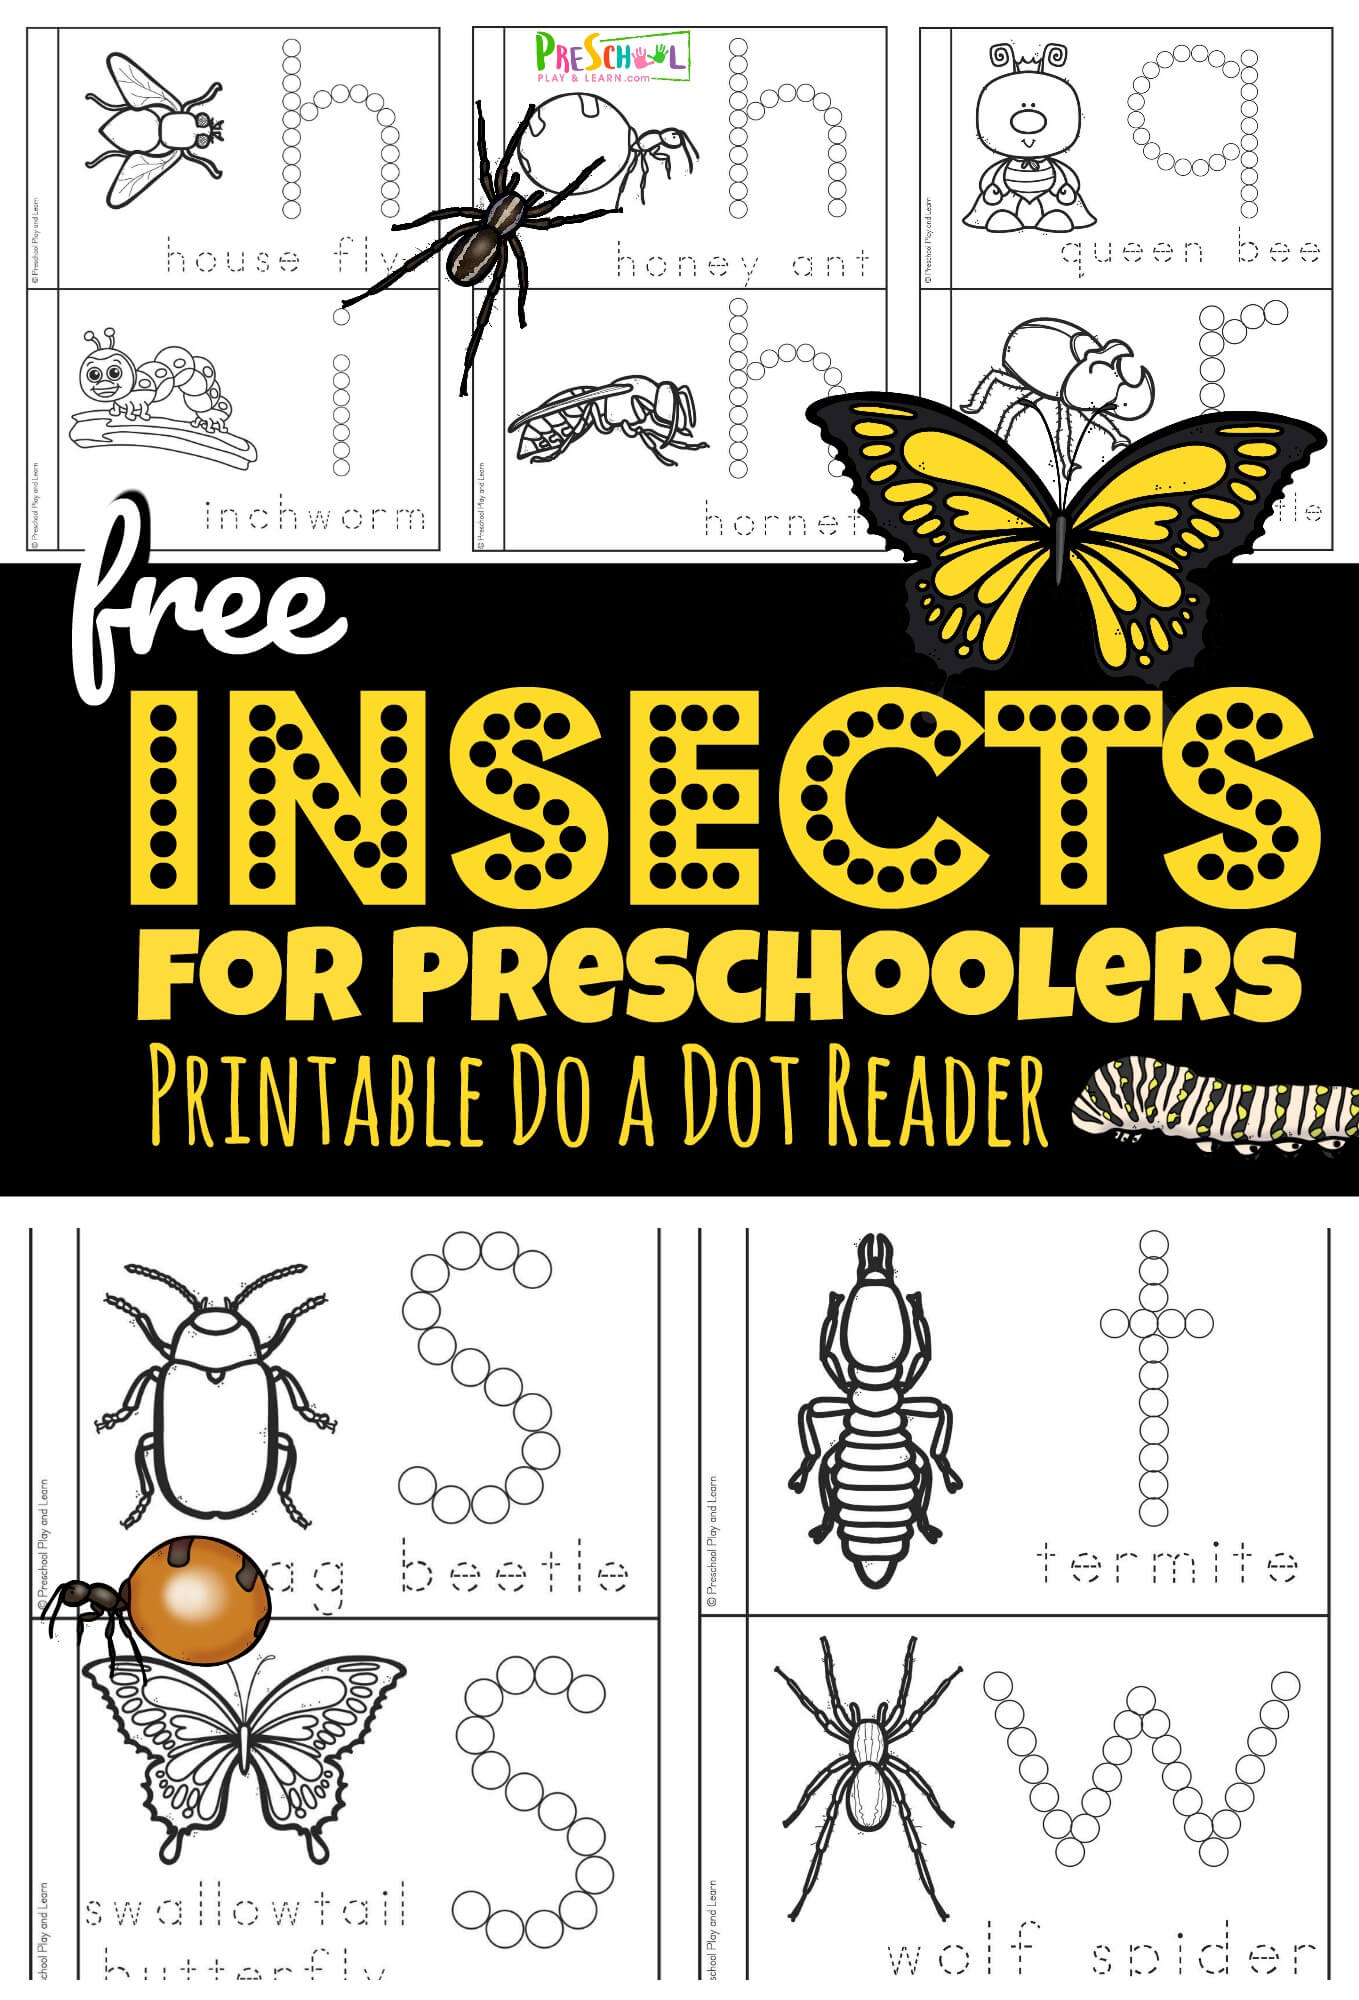 Free Insect Printables For Preschoolers - FREE PRINTABLE TEMPLATES